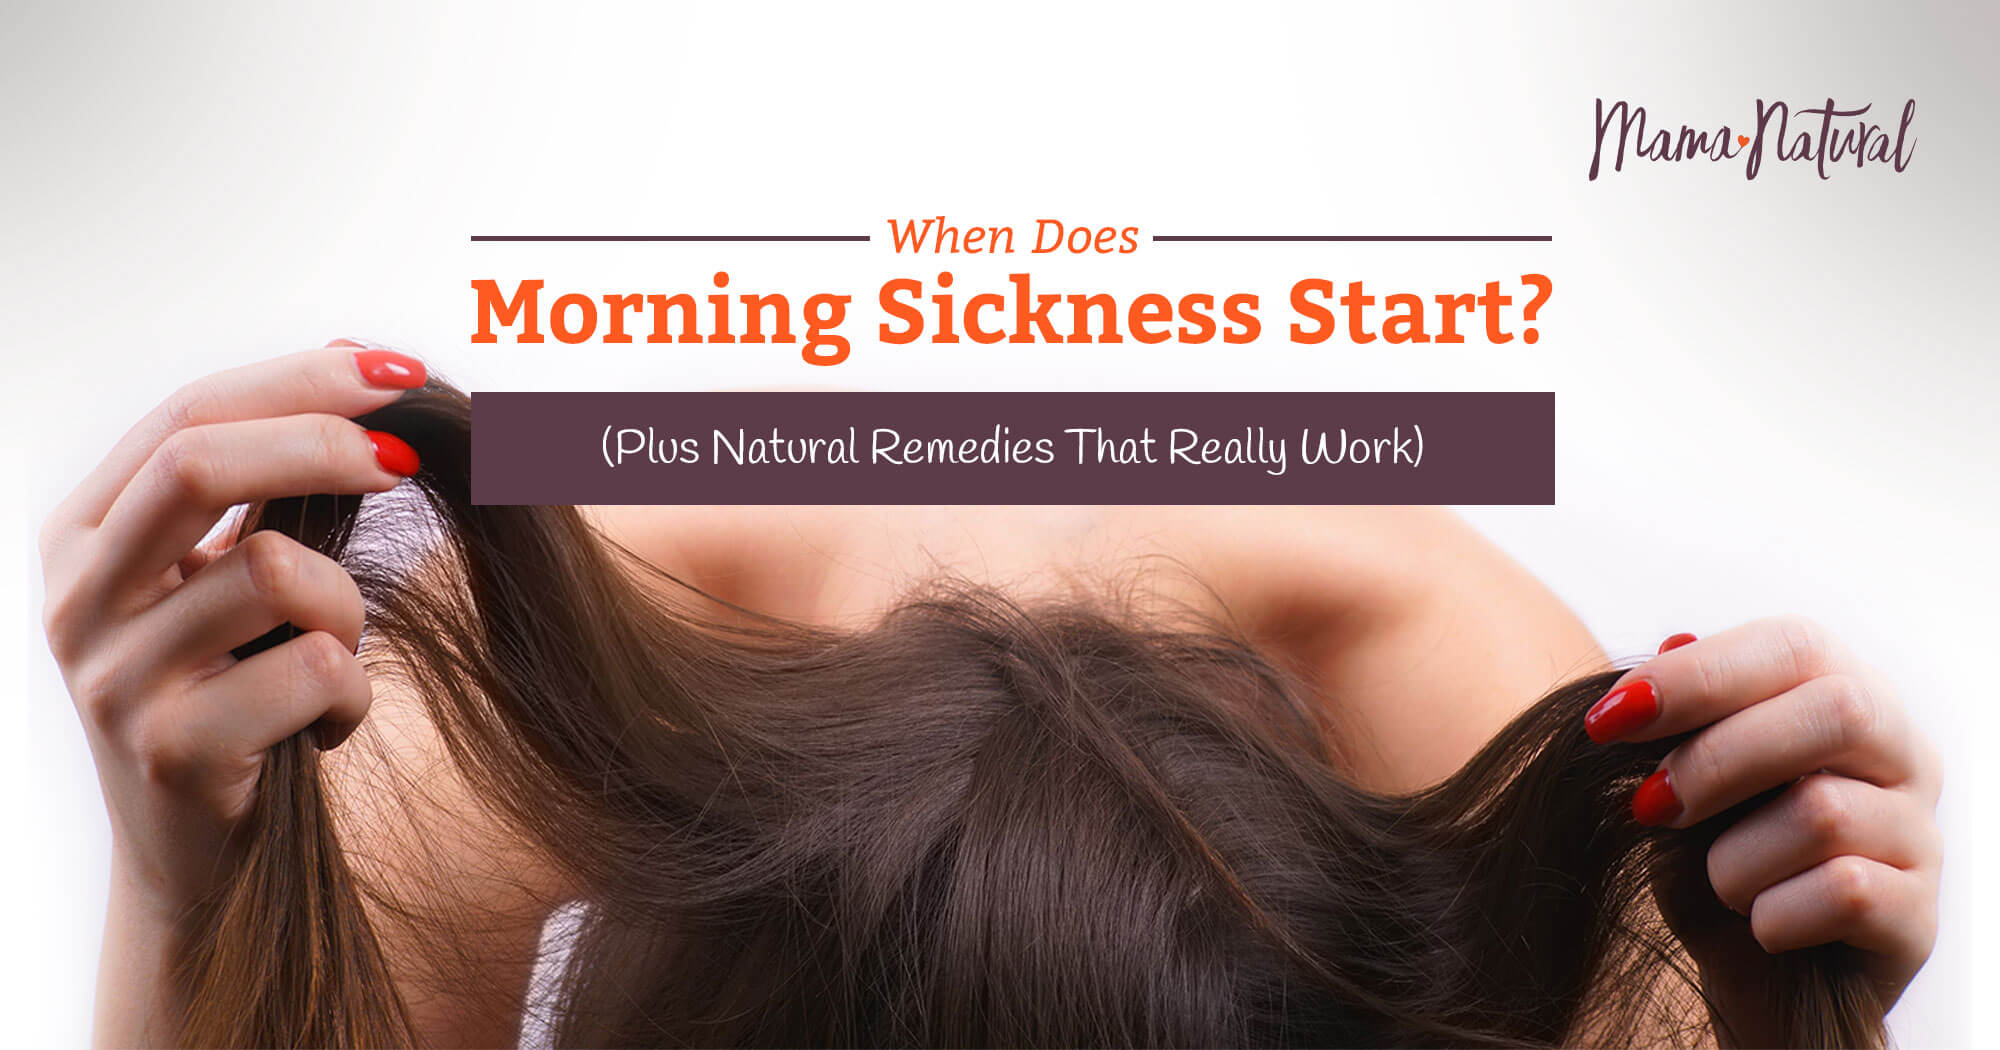 When Does Morning Sickness Start? (And How to Ease the Quease)